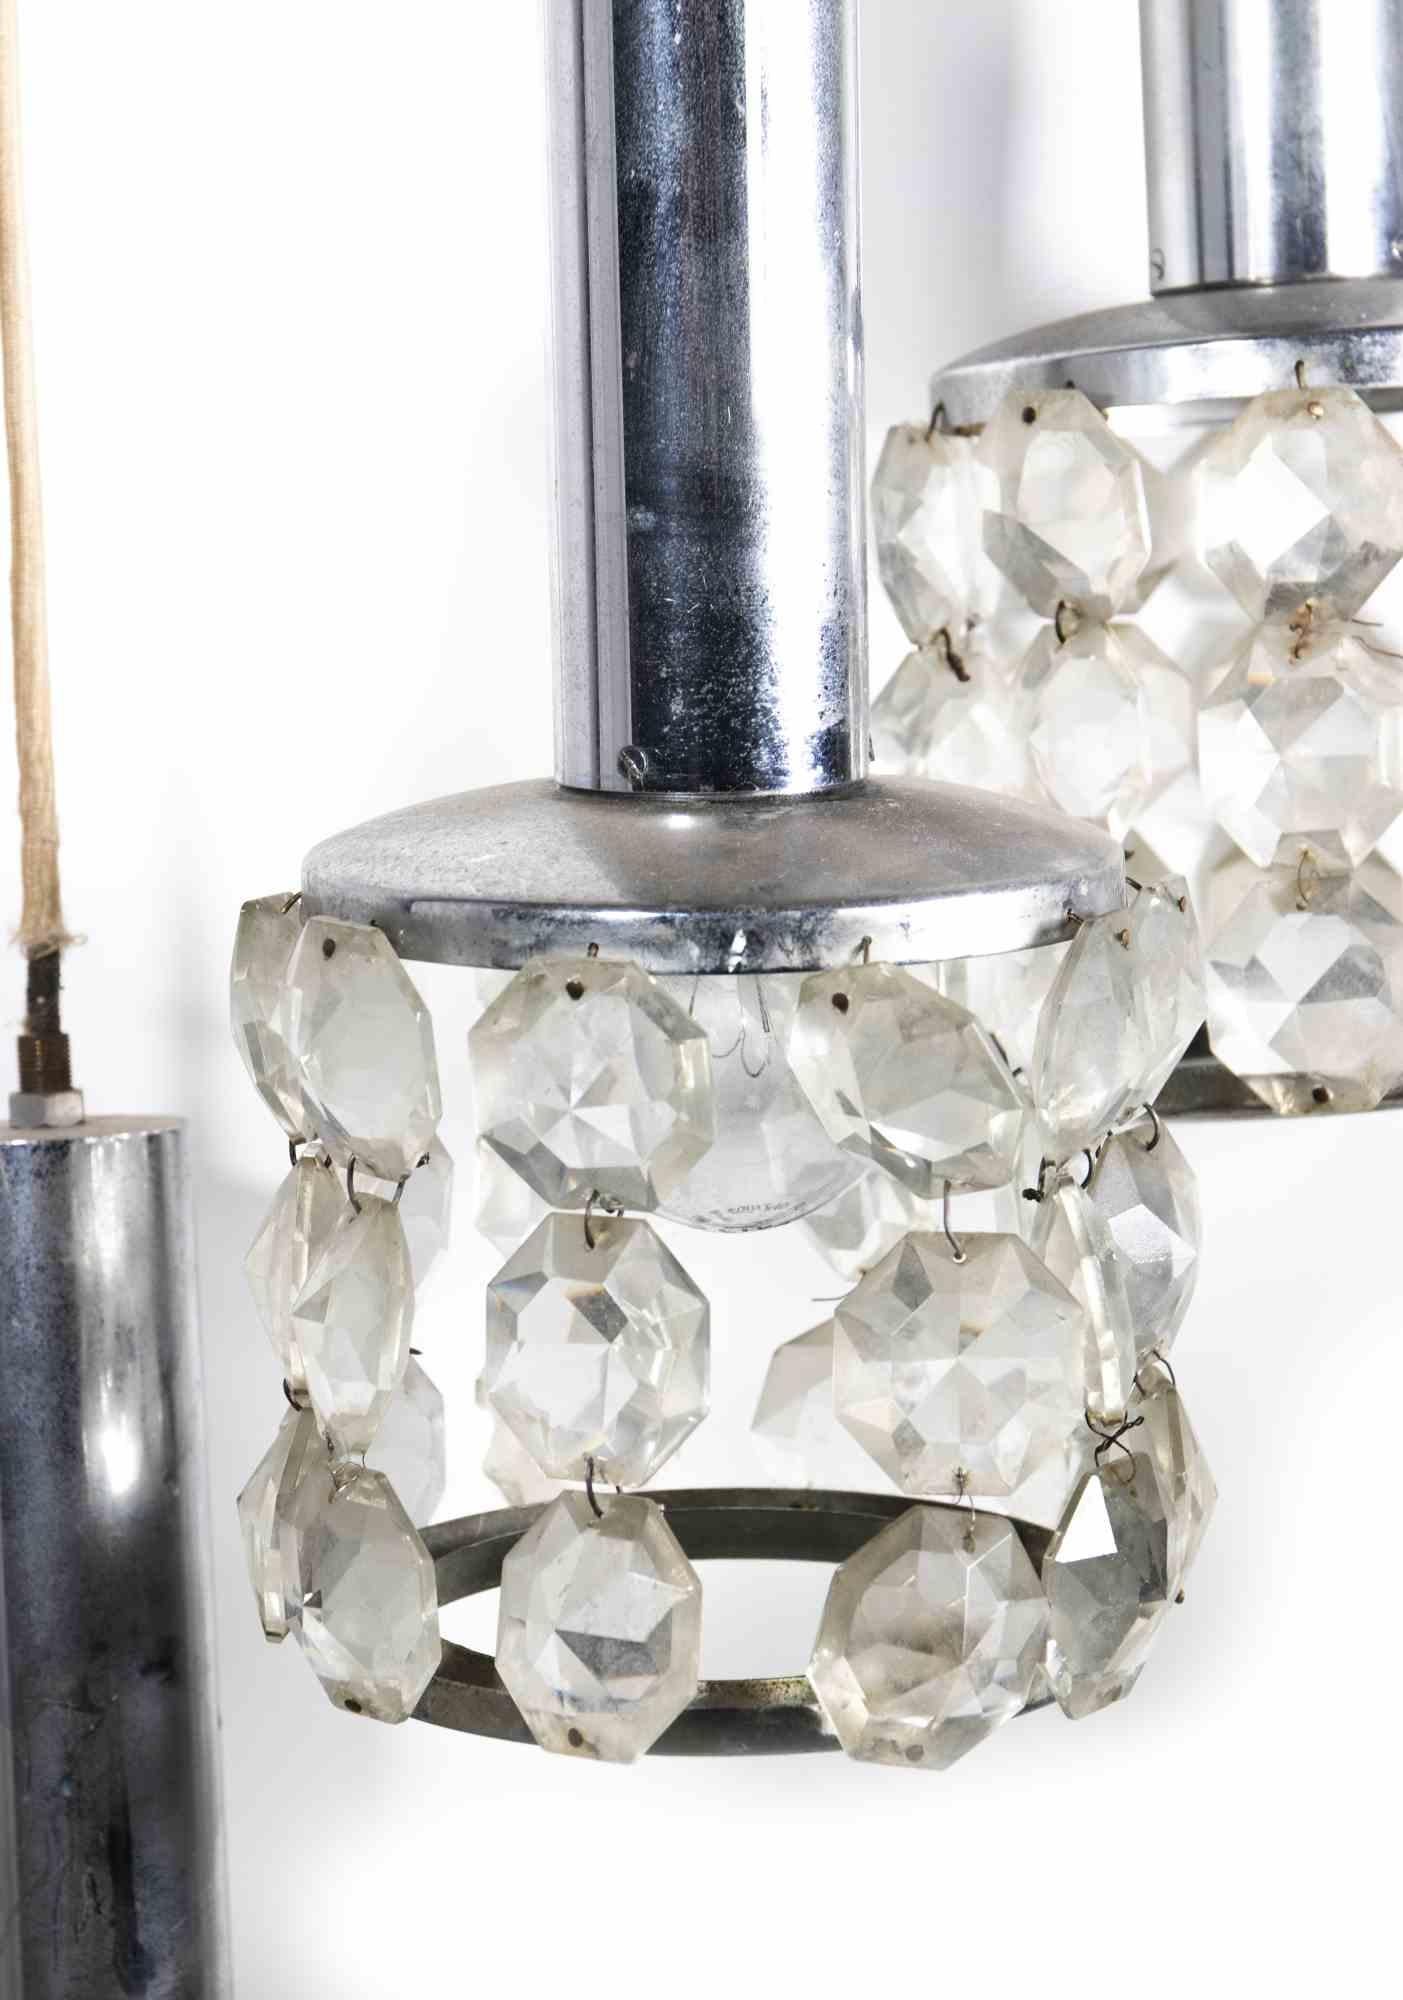 Vintage Chandelier by Gaetano Sciolari is an original design chandelier realized in the 1970s.

A very beautiful vintage lamp realized by the famous designer Gaetano Sciolari. 

The lamp is entirely realized in metal and glass.

Mint